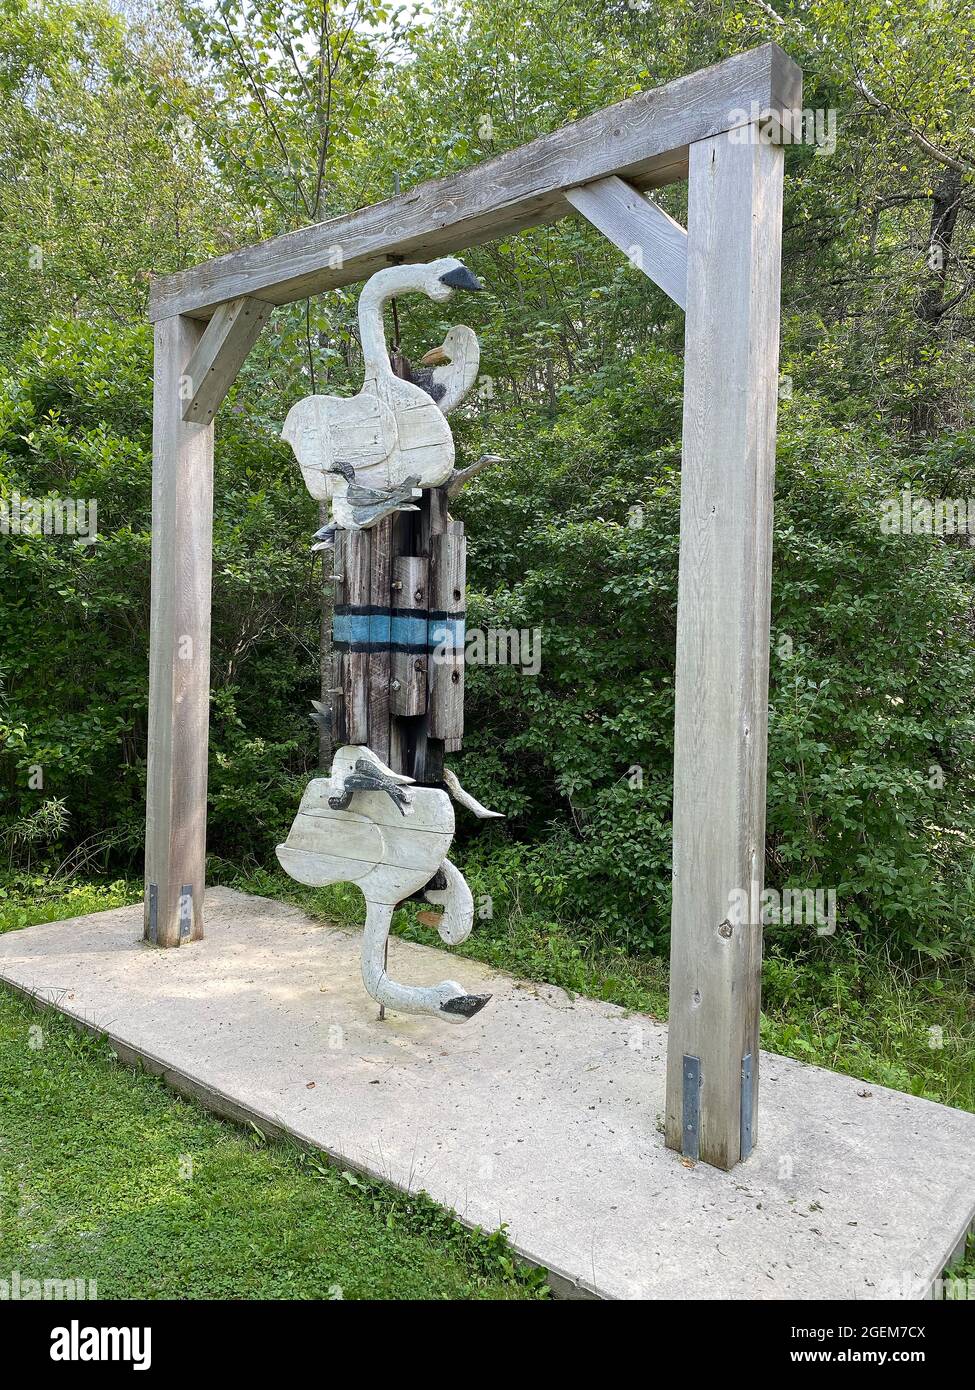 This sculpture, titled Reflection (seagulls on pilings with blue line representing water), was done by American artist Bernard Langlais and is housed at the Langlais Sculpture Preserve in Cushing, Maine. Bernard Langlais (1921 - 1977) was a Maine native and maintained a studio in Cushing, Maine until his death at the age of 56. He developed his artistic interest at the Corcoran School of Art in Washington DC and the Skowhegan School of Painting and Sculpture. Stock Photo